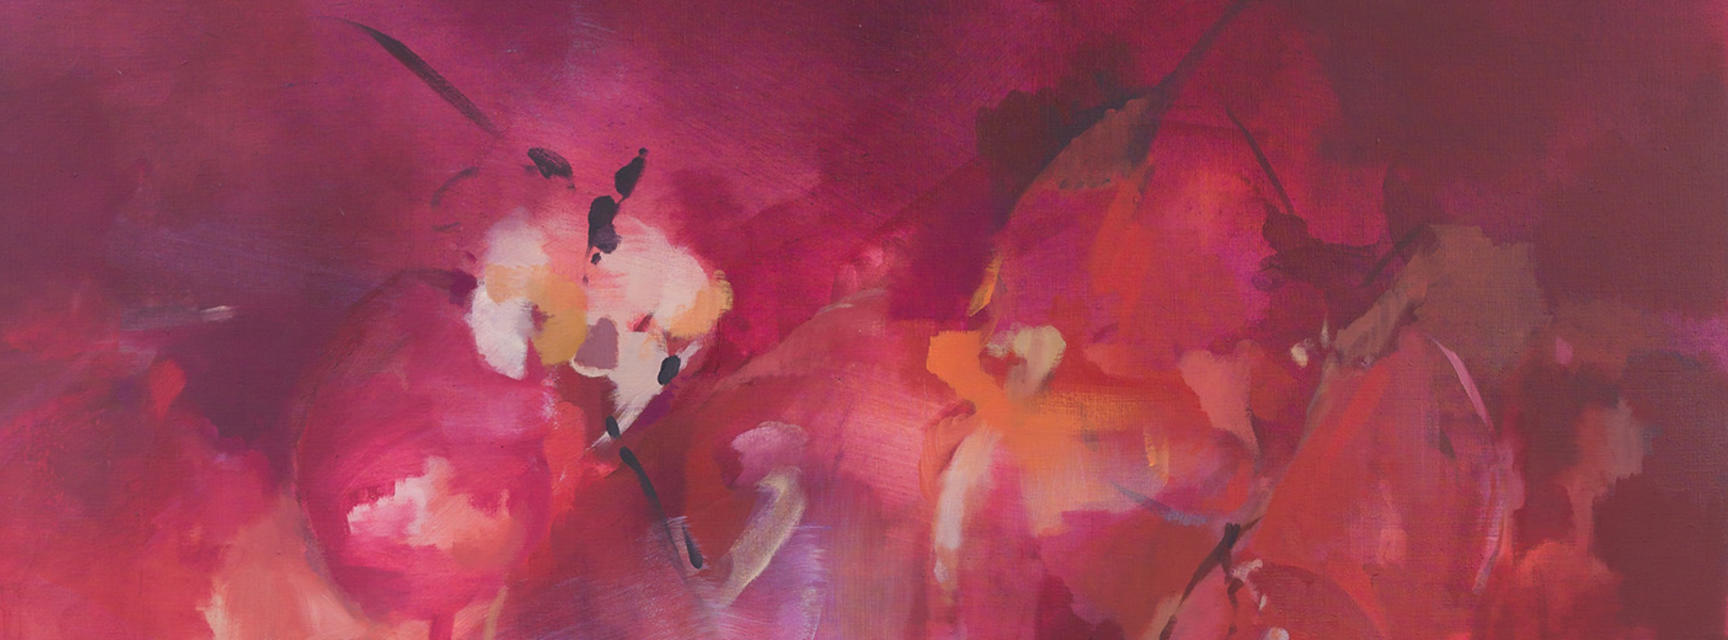 Detail from the Ashmolean Now summer exhibition of Flora Yukhnovich' artwork showing abstract flowers